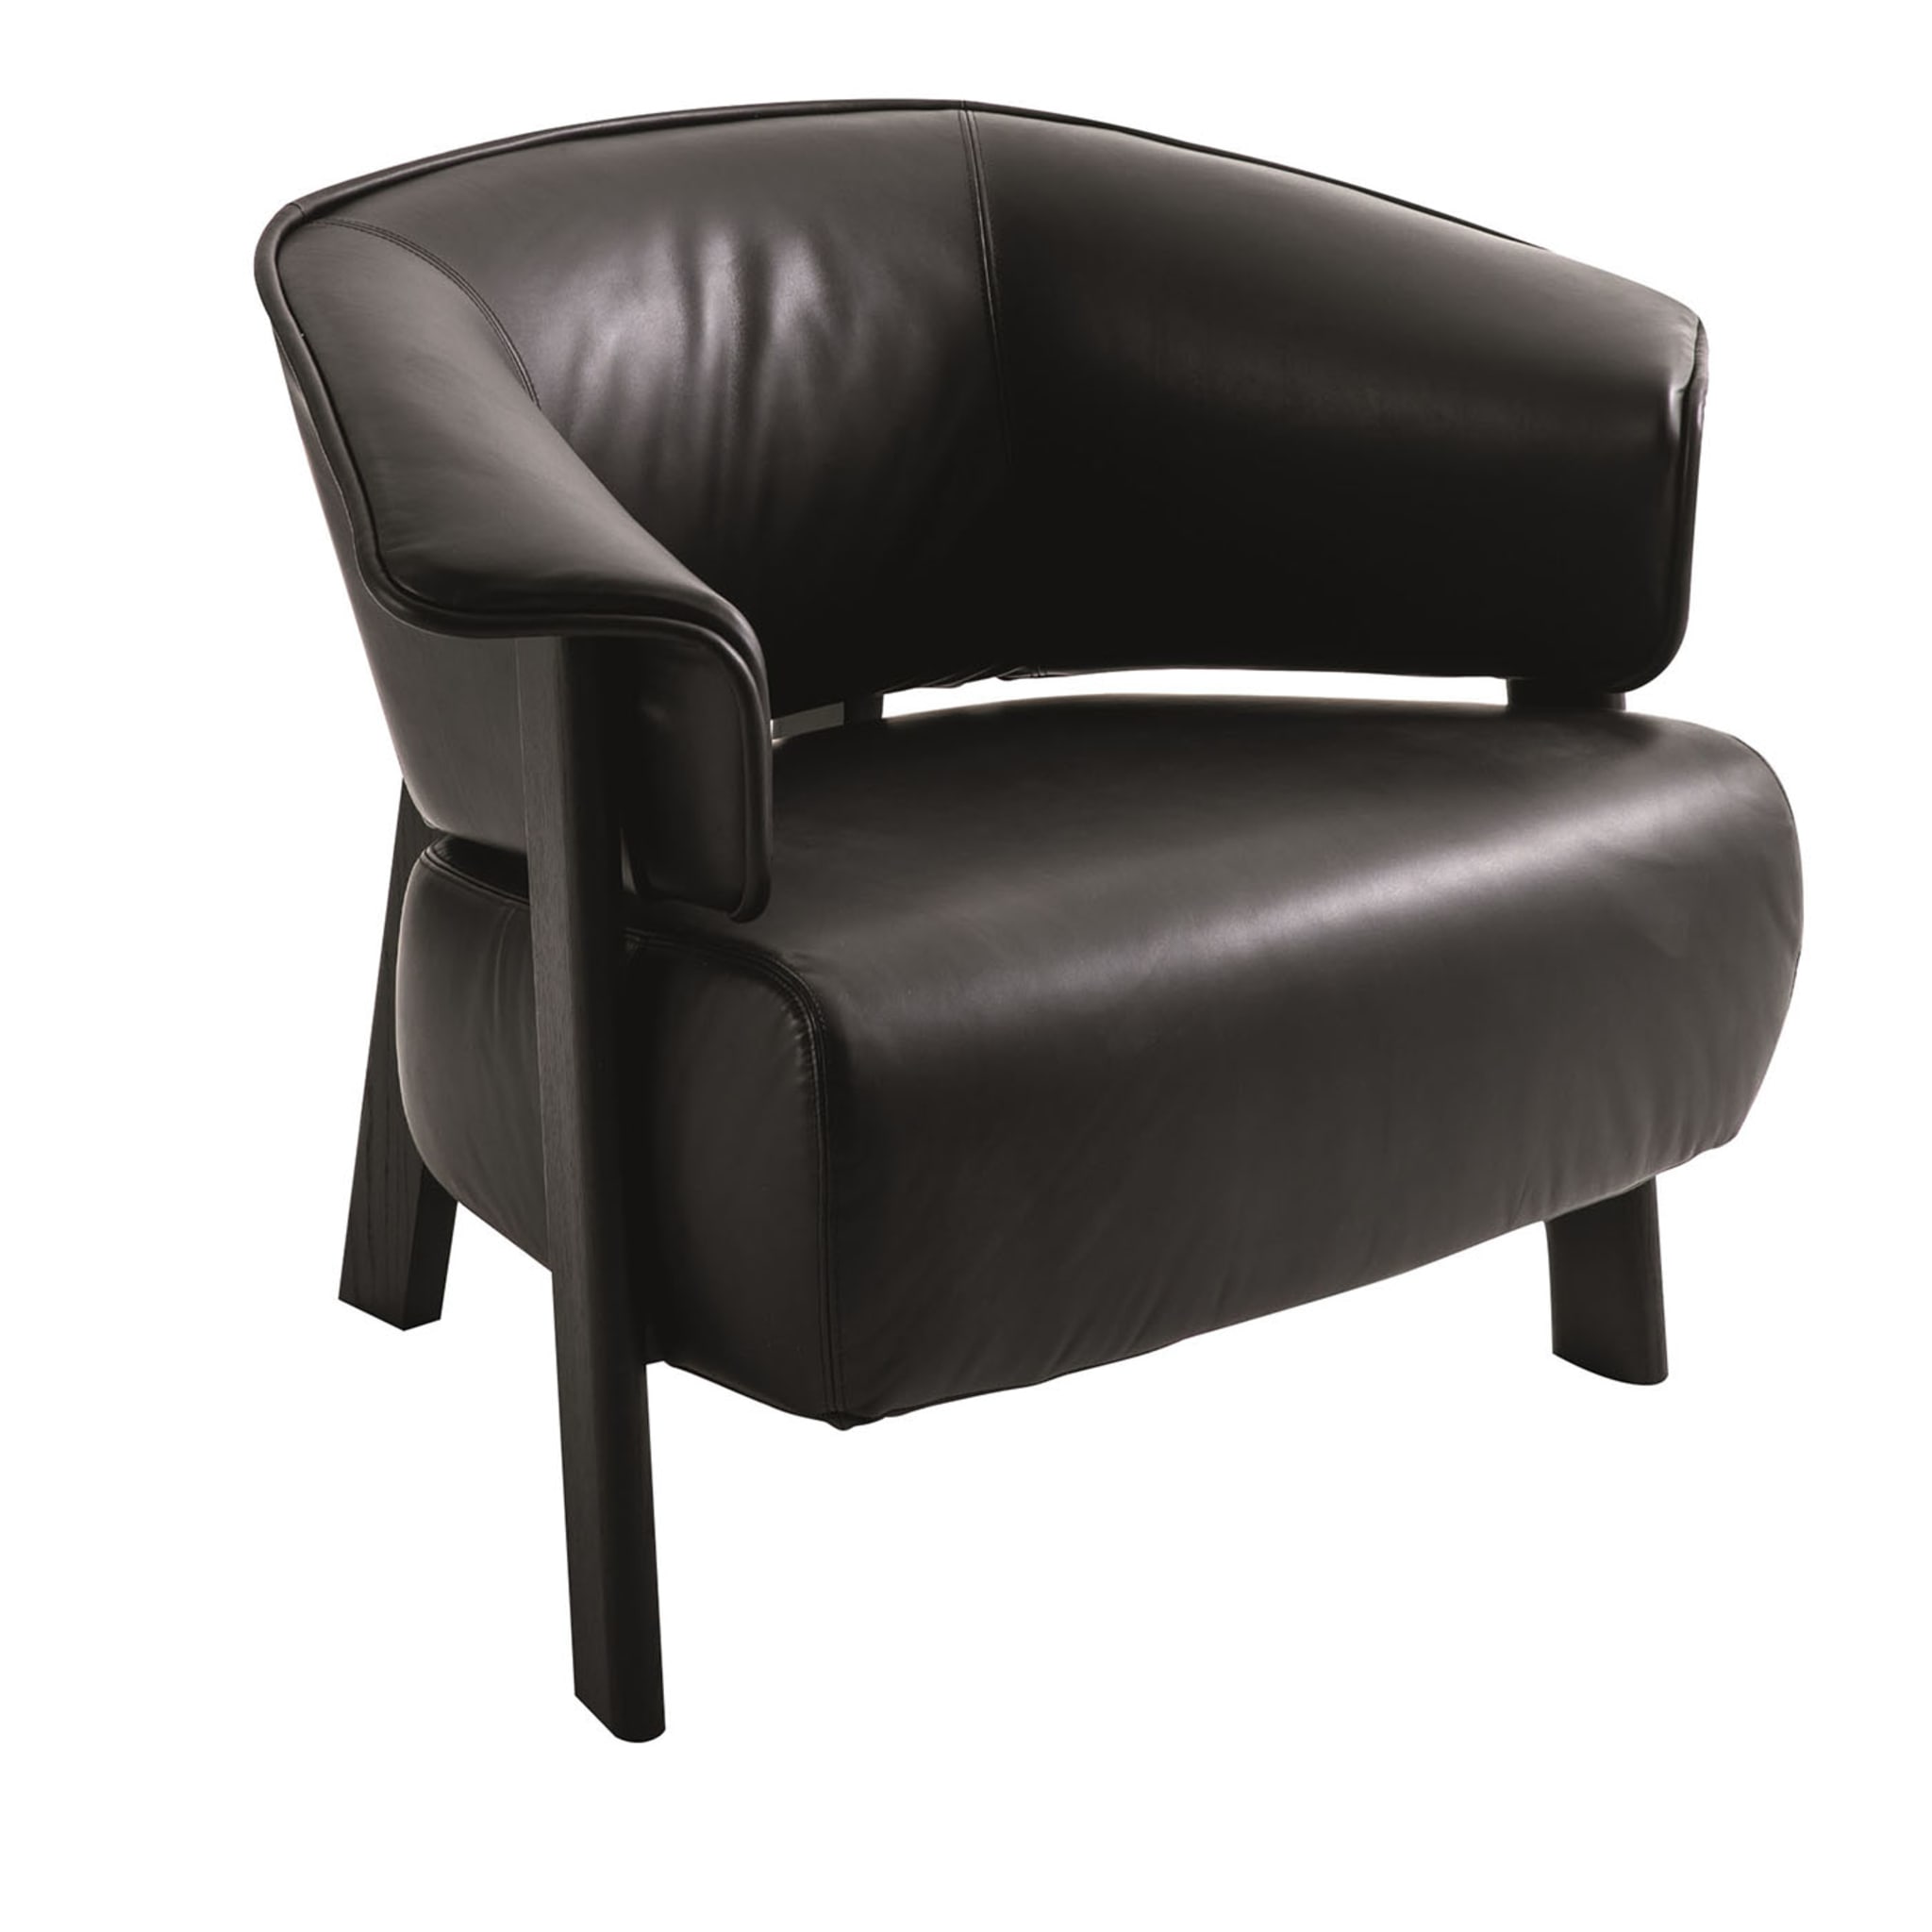 Back-Wing Black Armchair by Patricia Urquiola - Main view